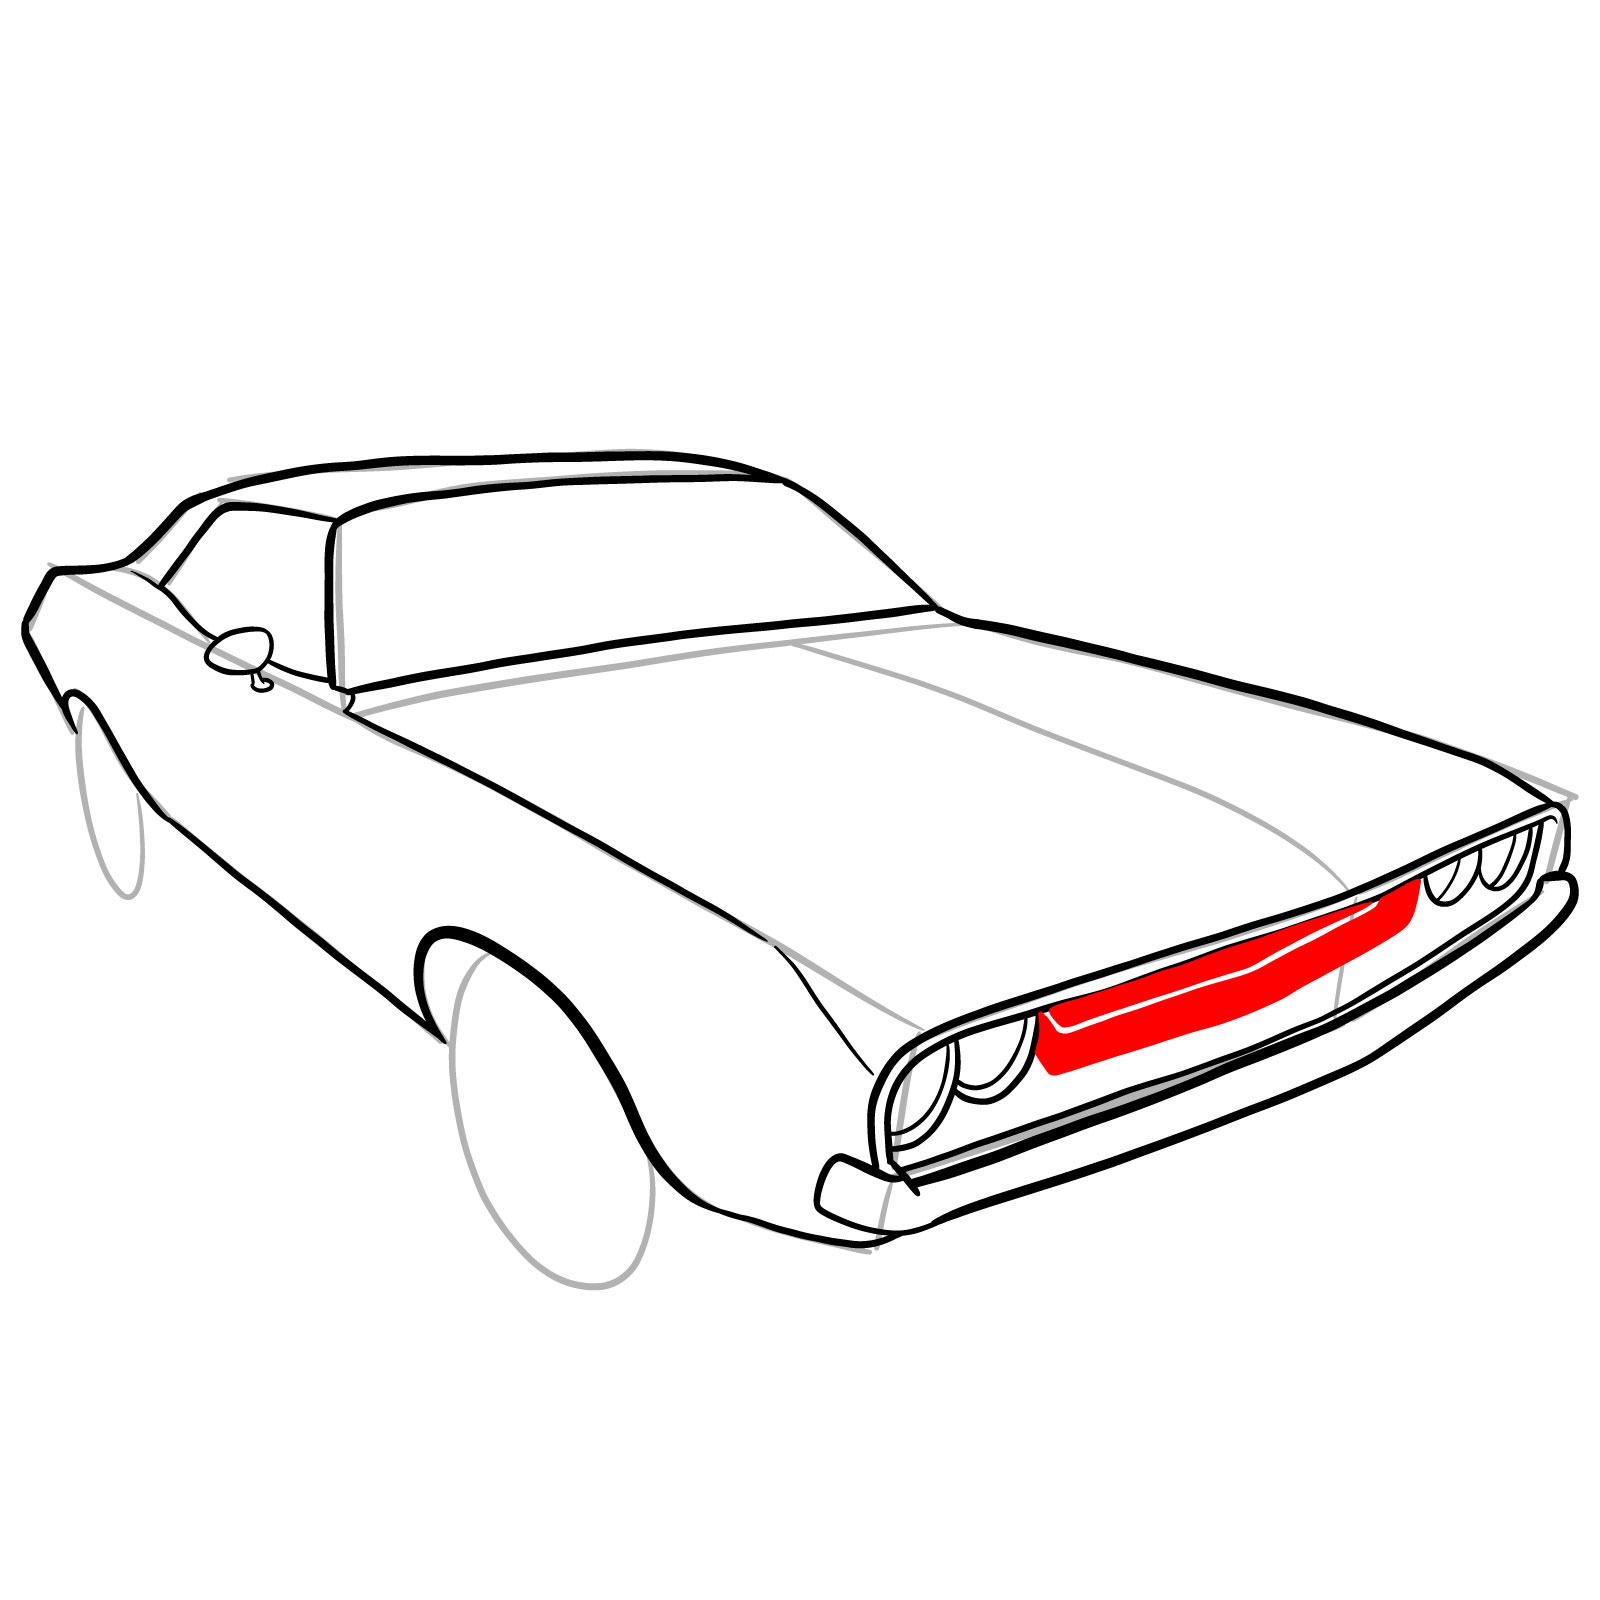 How to draw Dodge Challenger 1970 - step 21